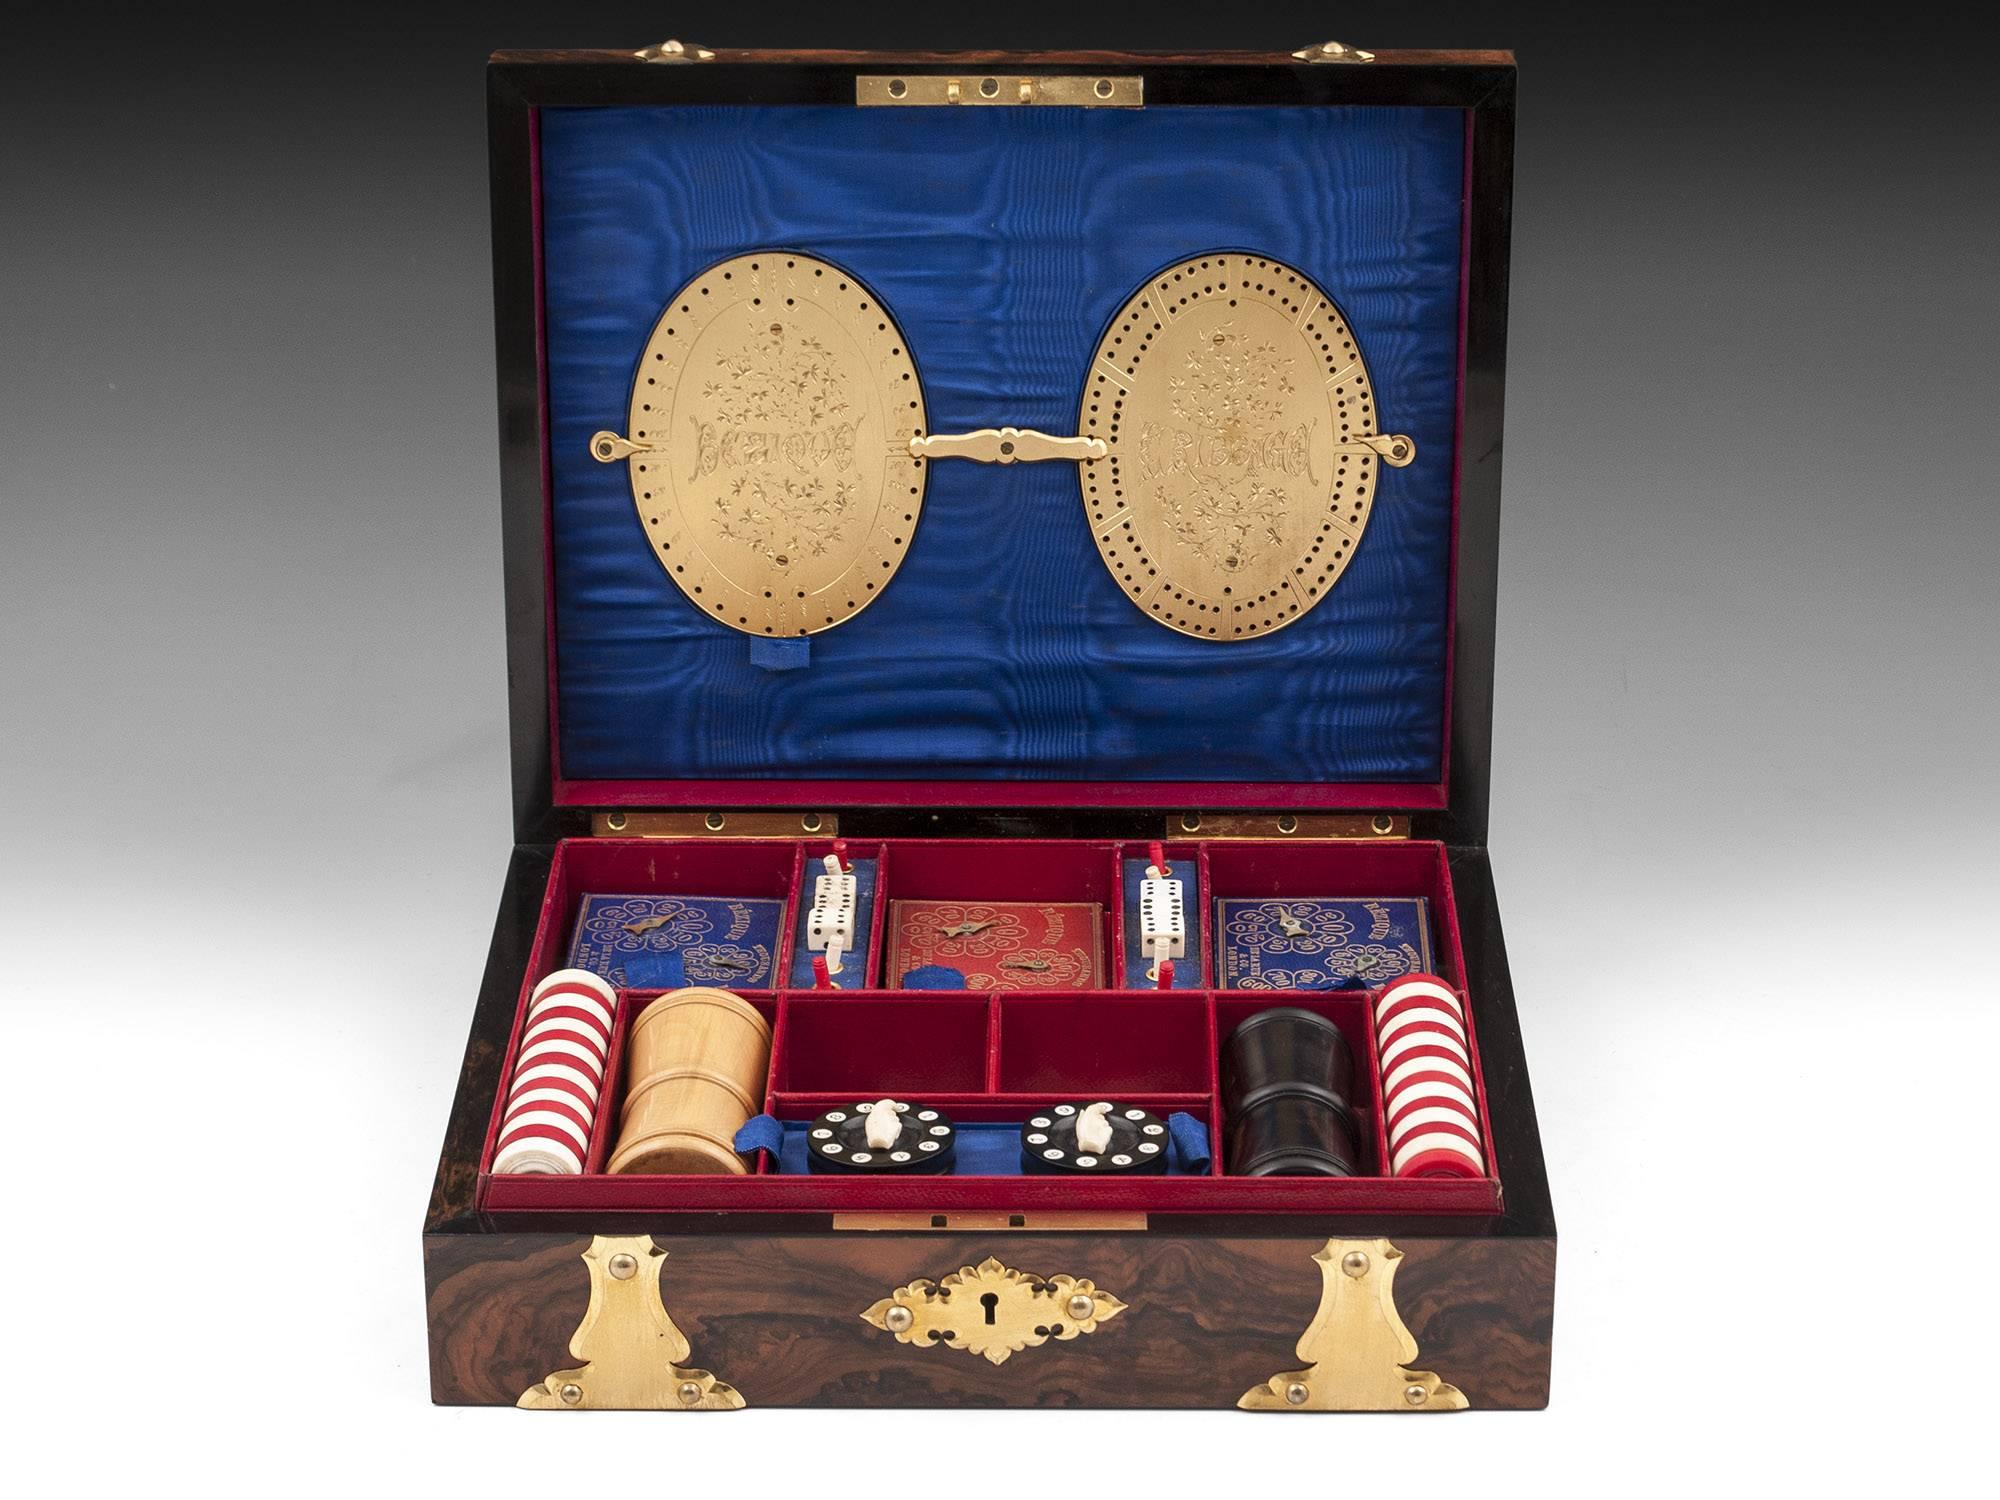 Betjemann Feathered Walnut and Brass Games Box In Good Condition For Sale In Northampton, United Kingdom